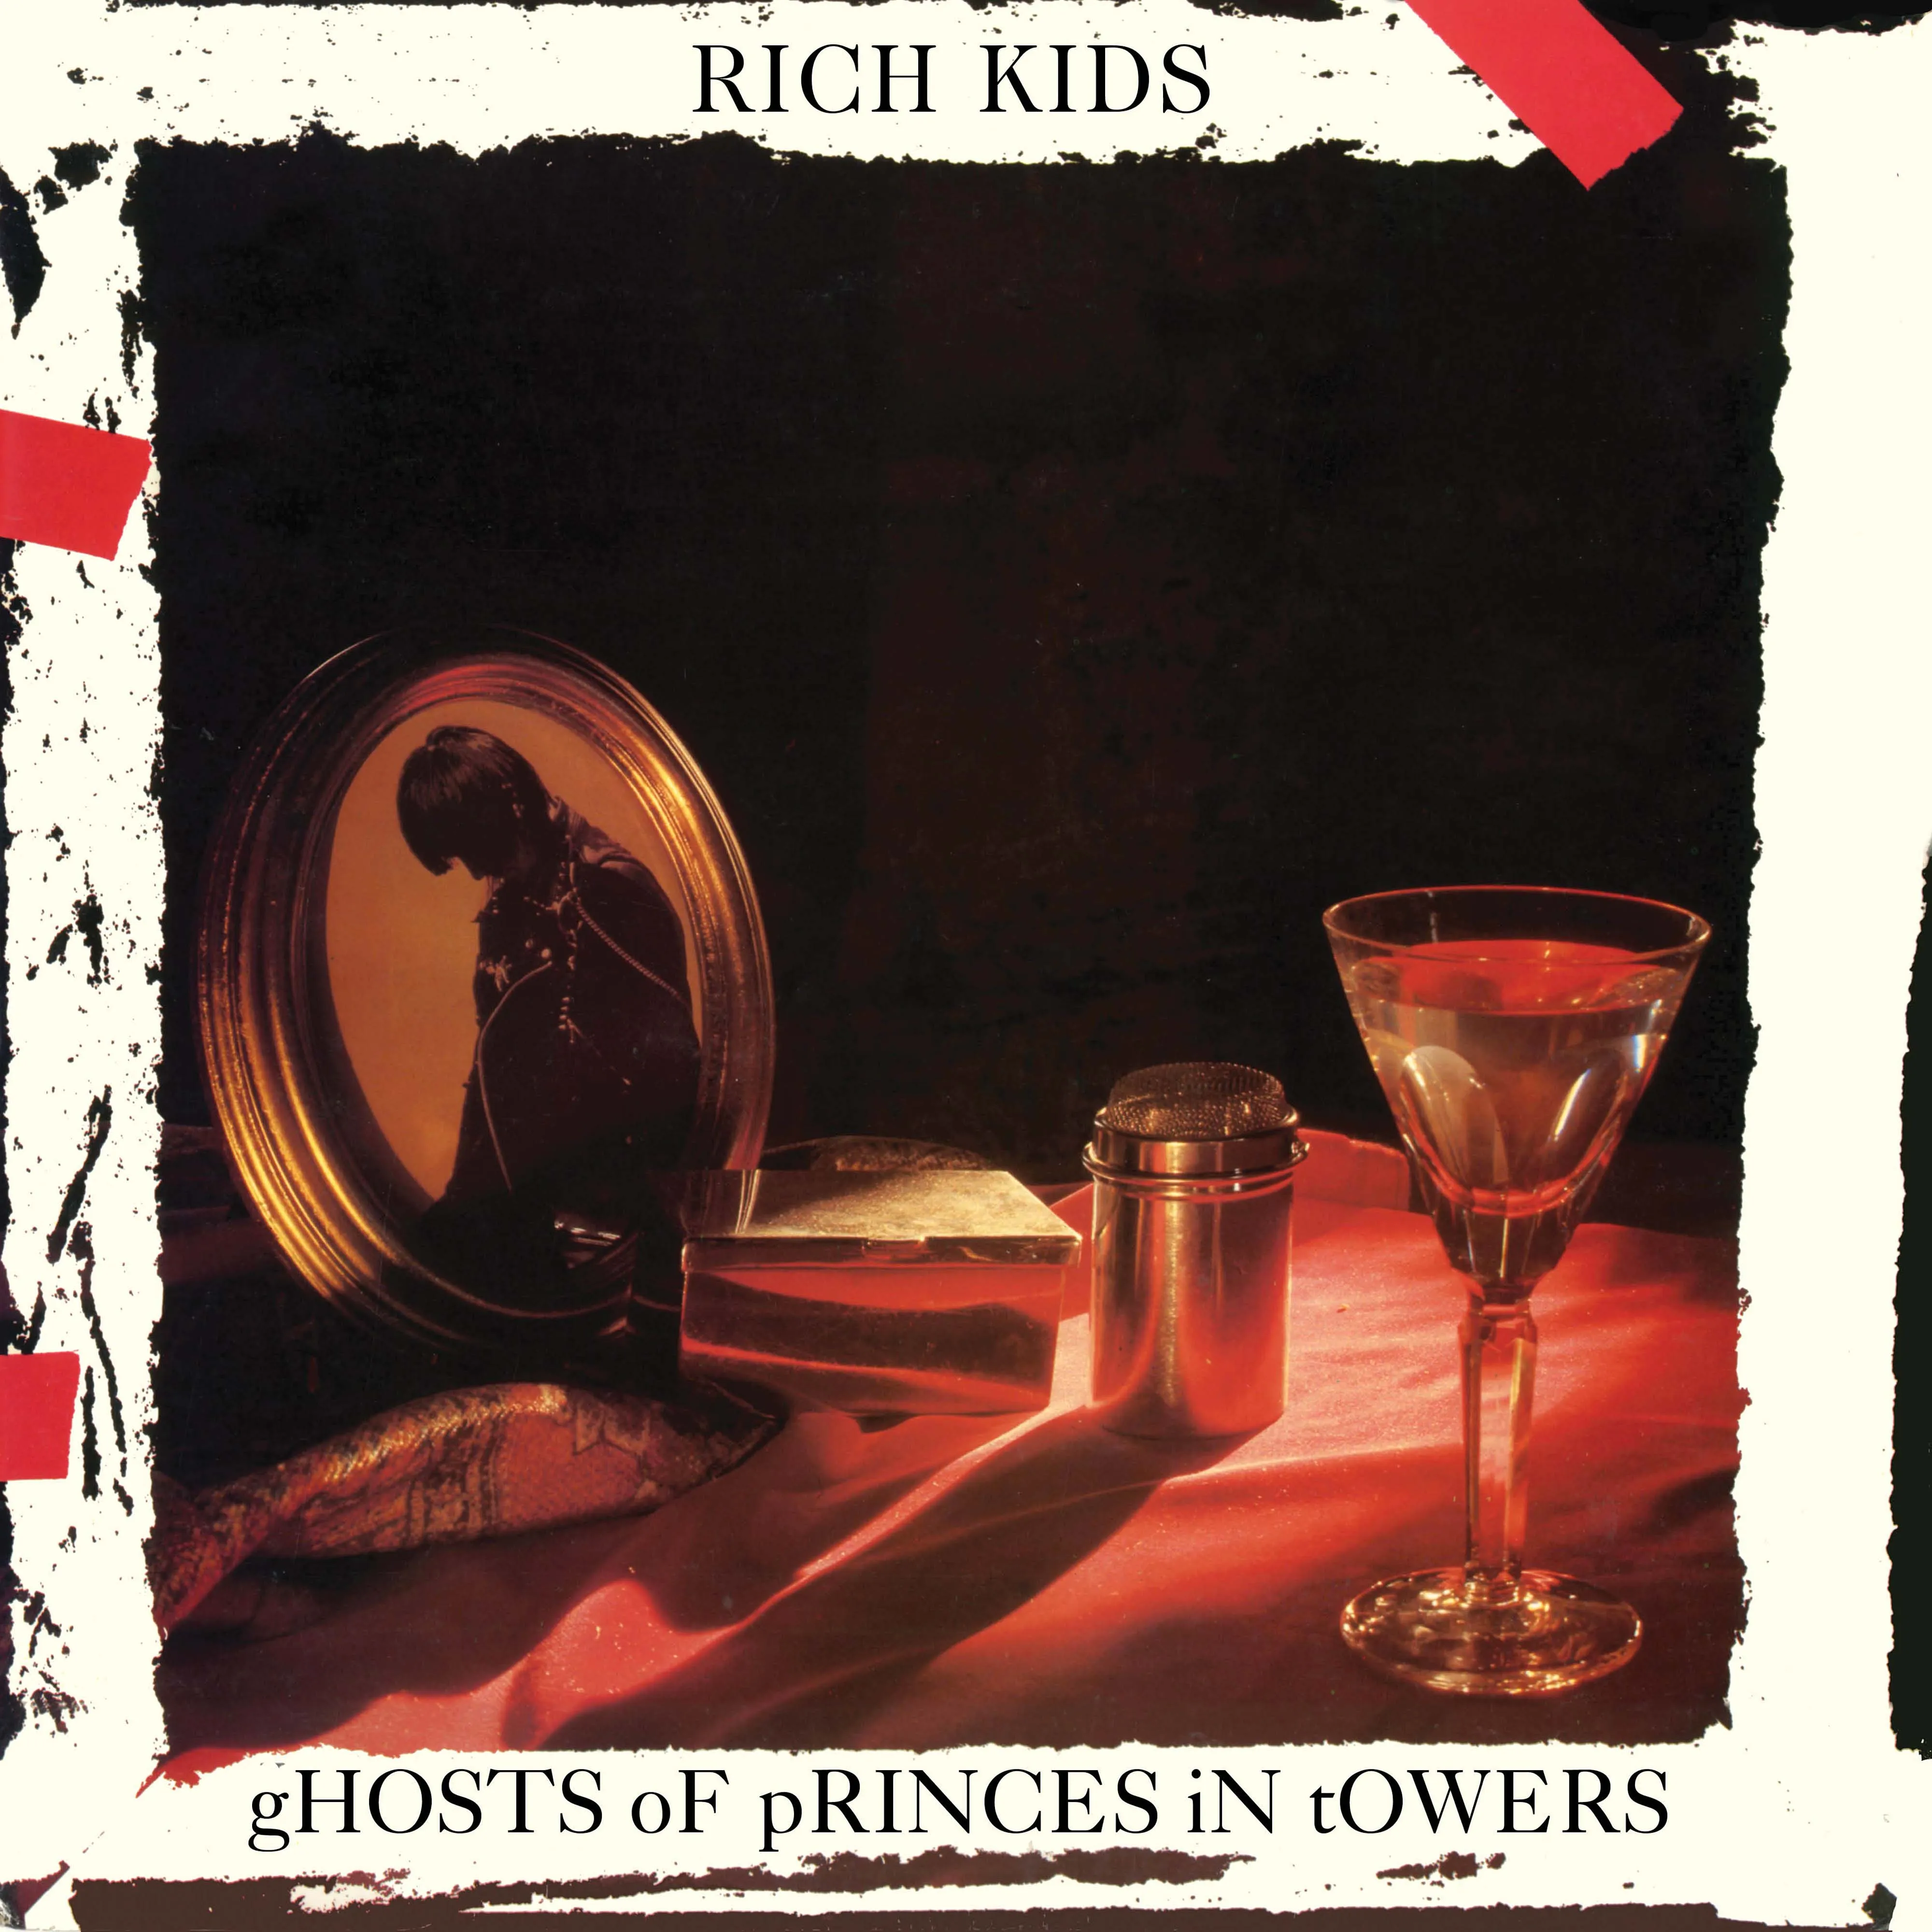 RICH KIDS / GHOSTS OF PRINCES IN TOWERSのアナログレコードジャケット (準備中)